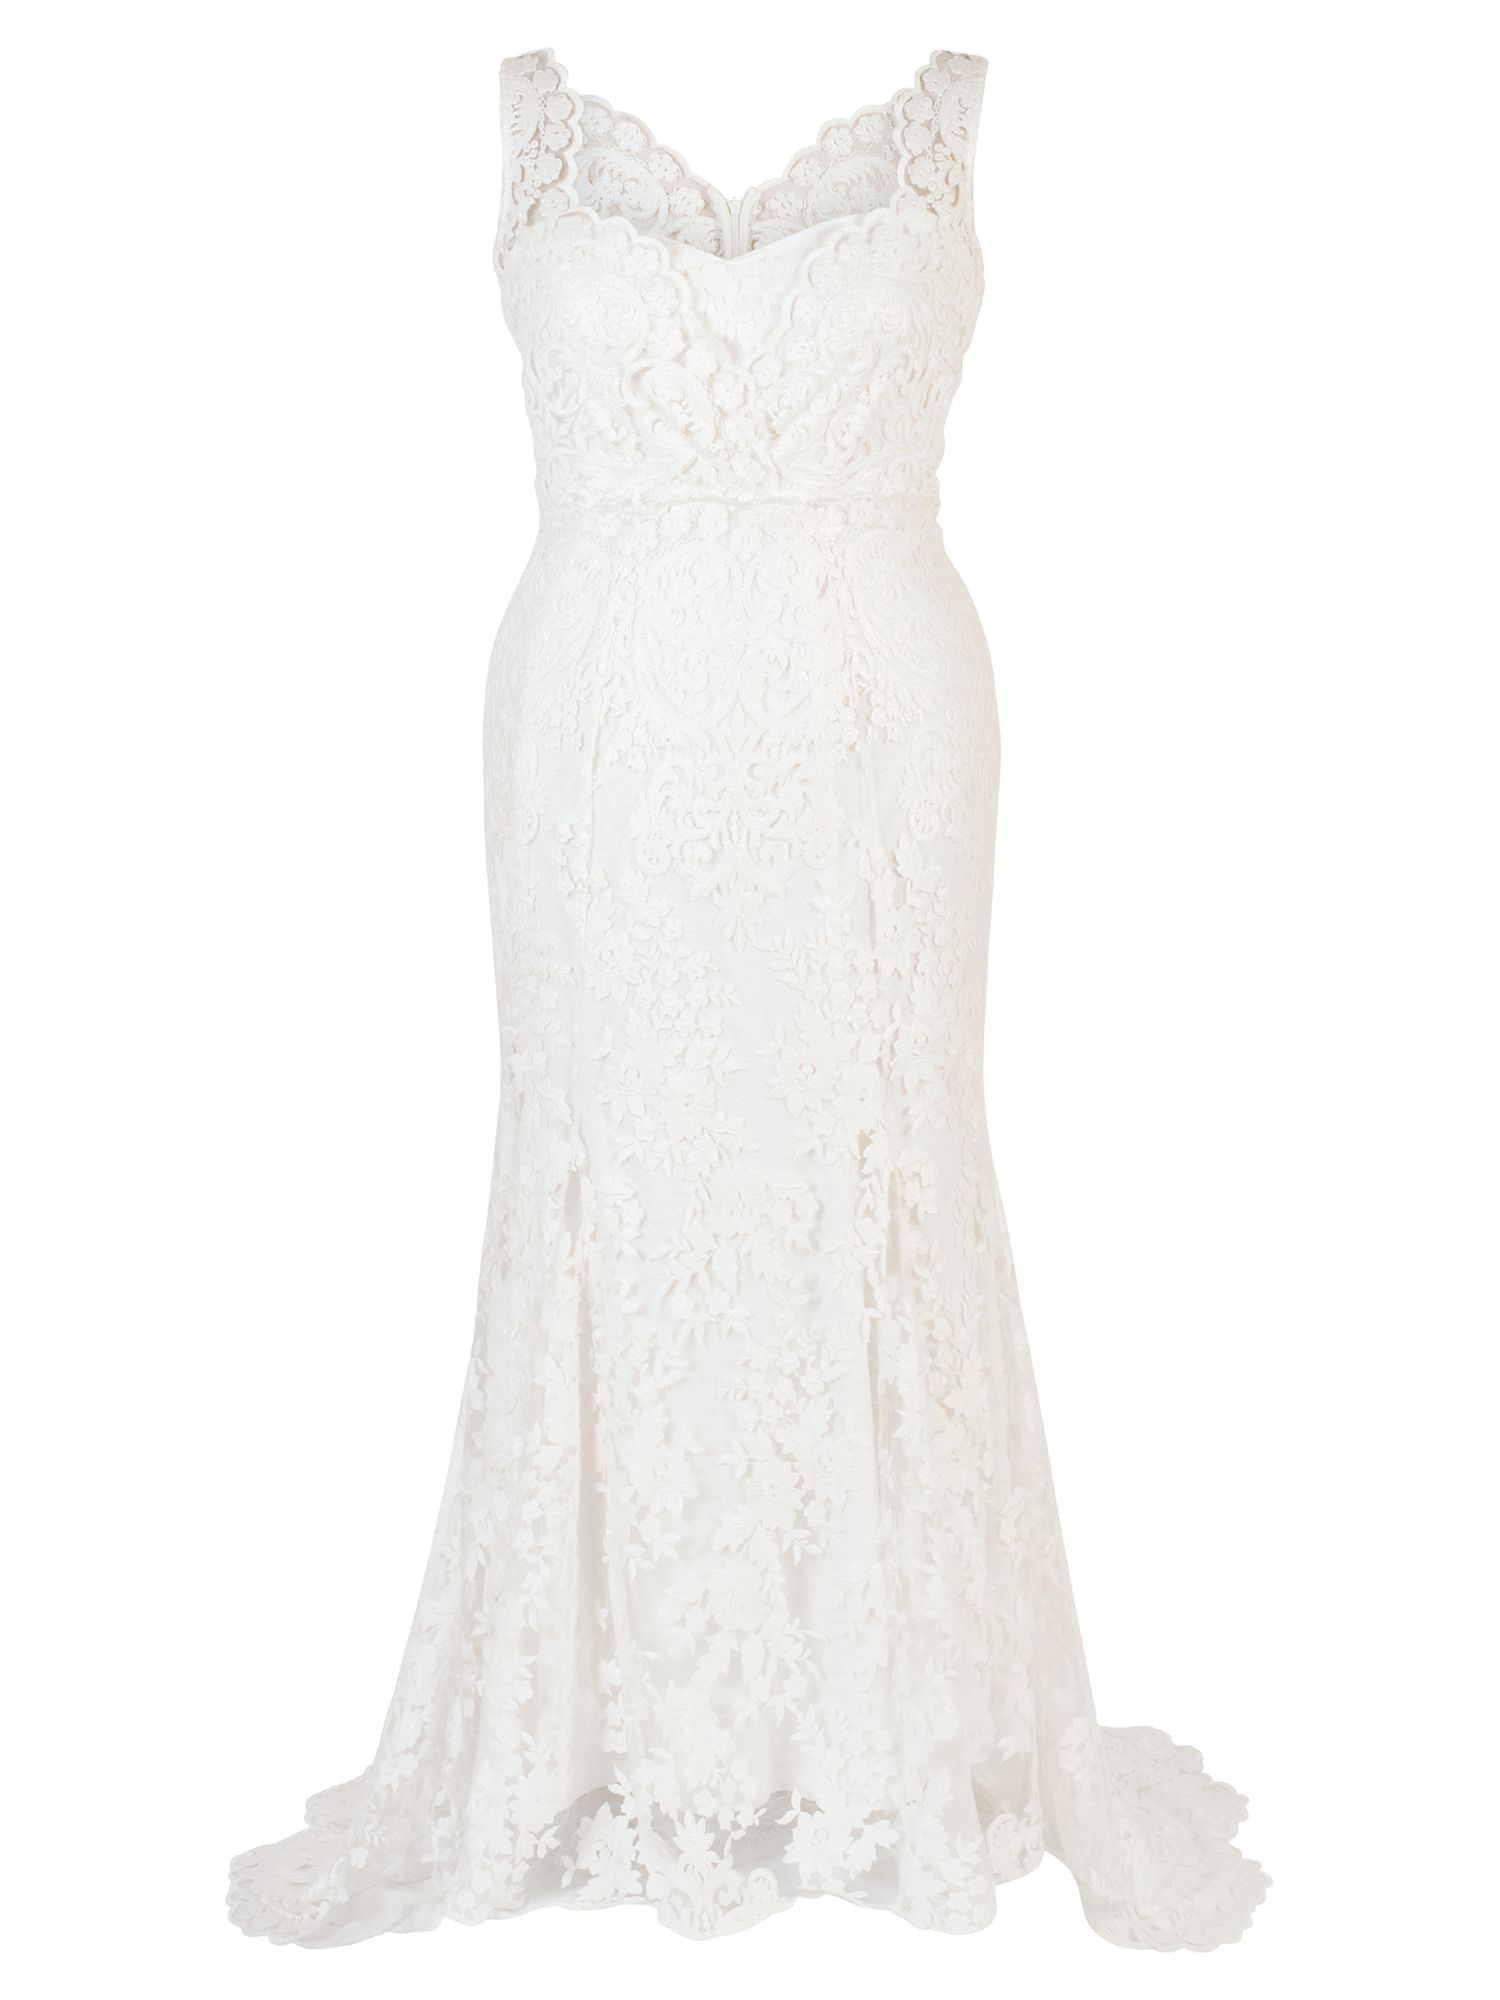 Chesca Scallop Lace Wedding Dress, Ivory at John Lewis & Partners